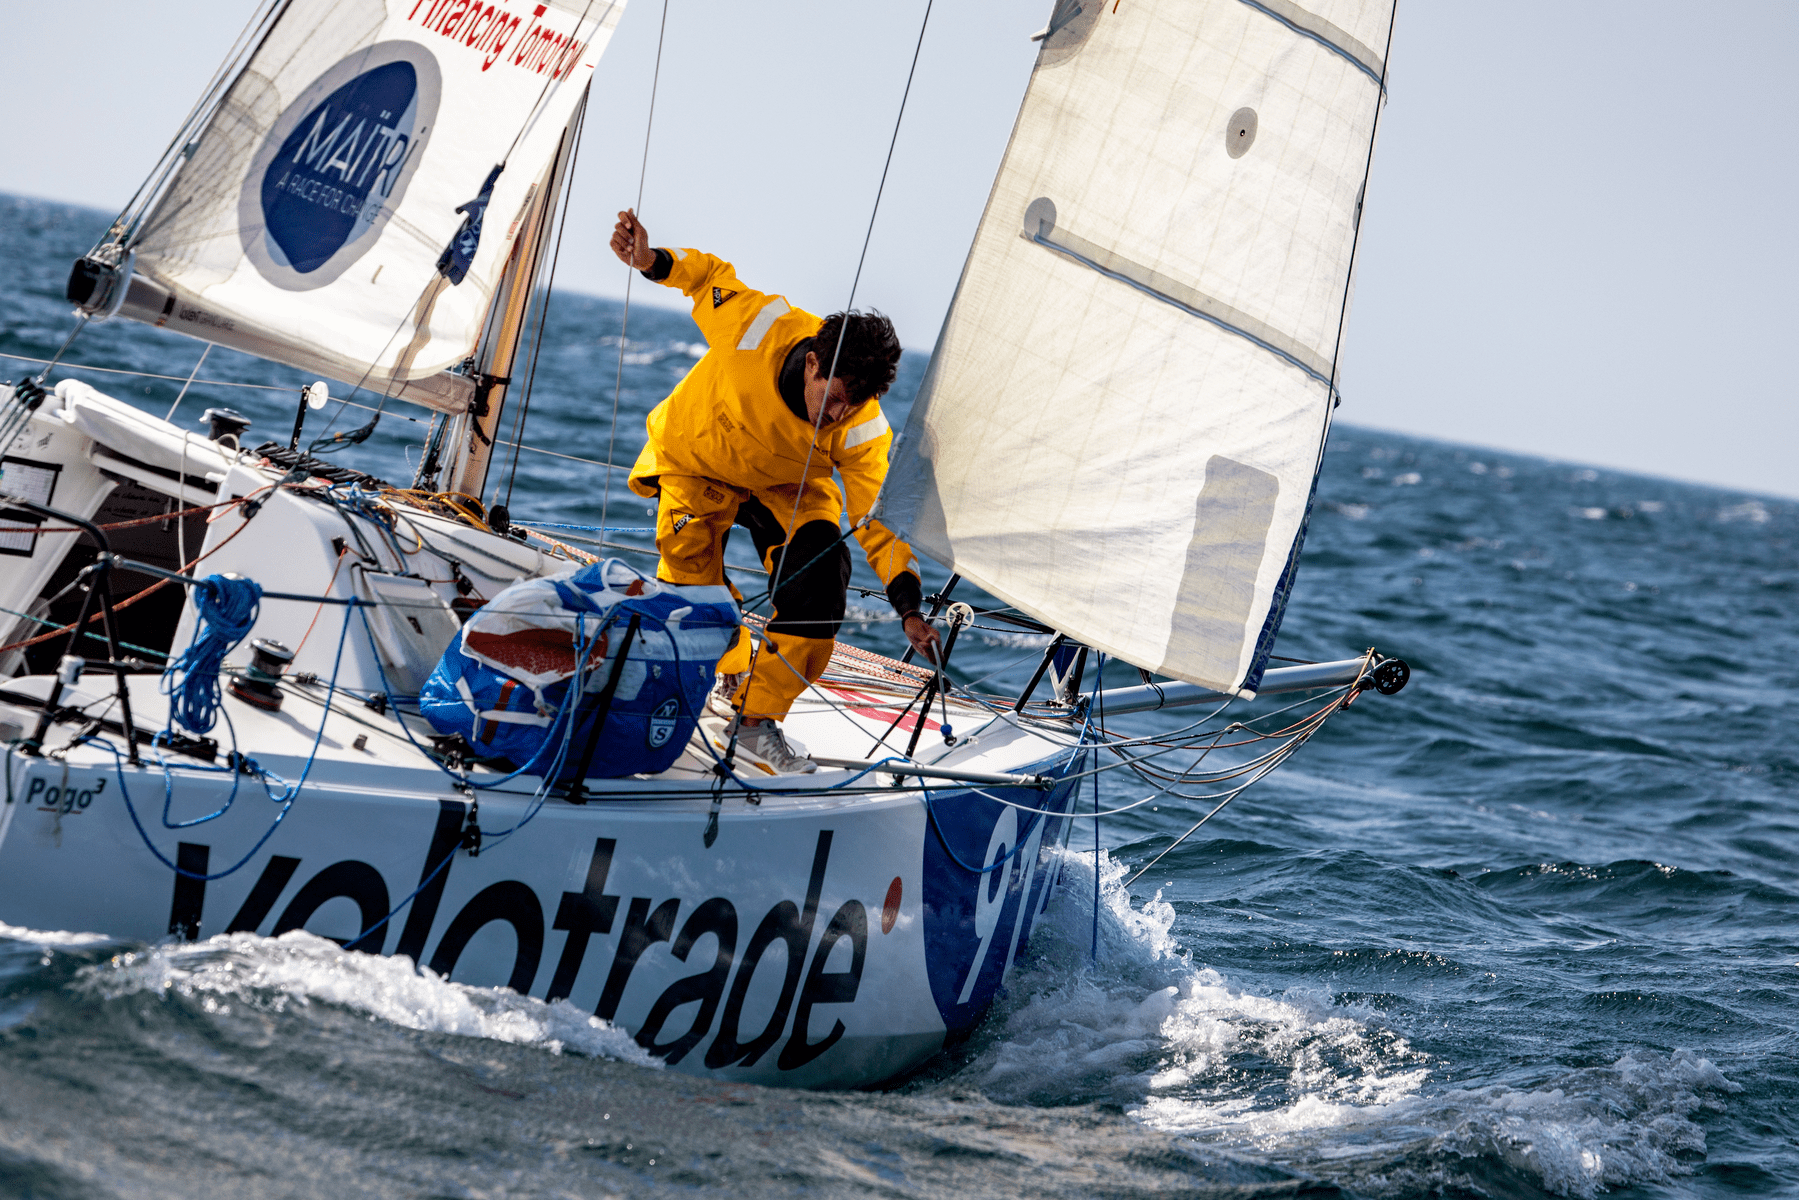 Velotrade boat close-up shot with skipper Brieuc in action at the Mini Gascogna race.